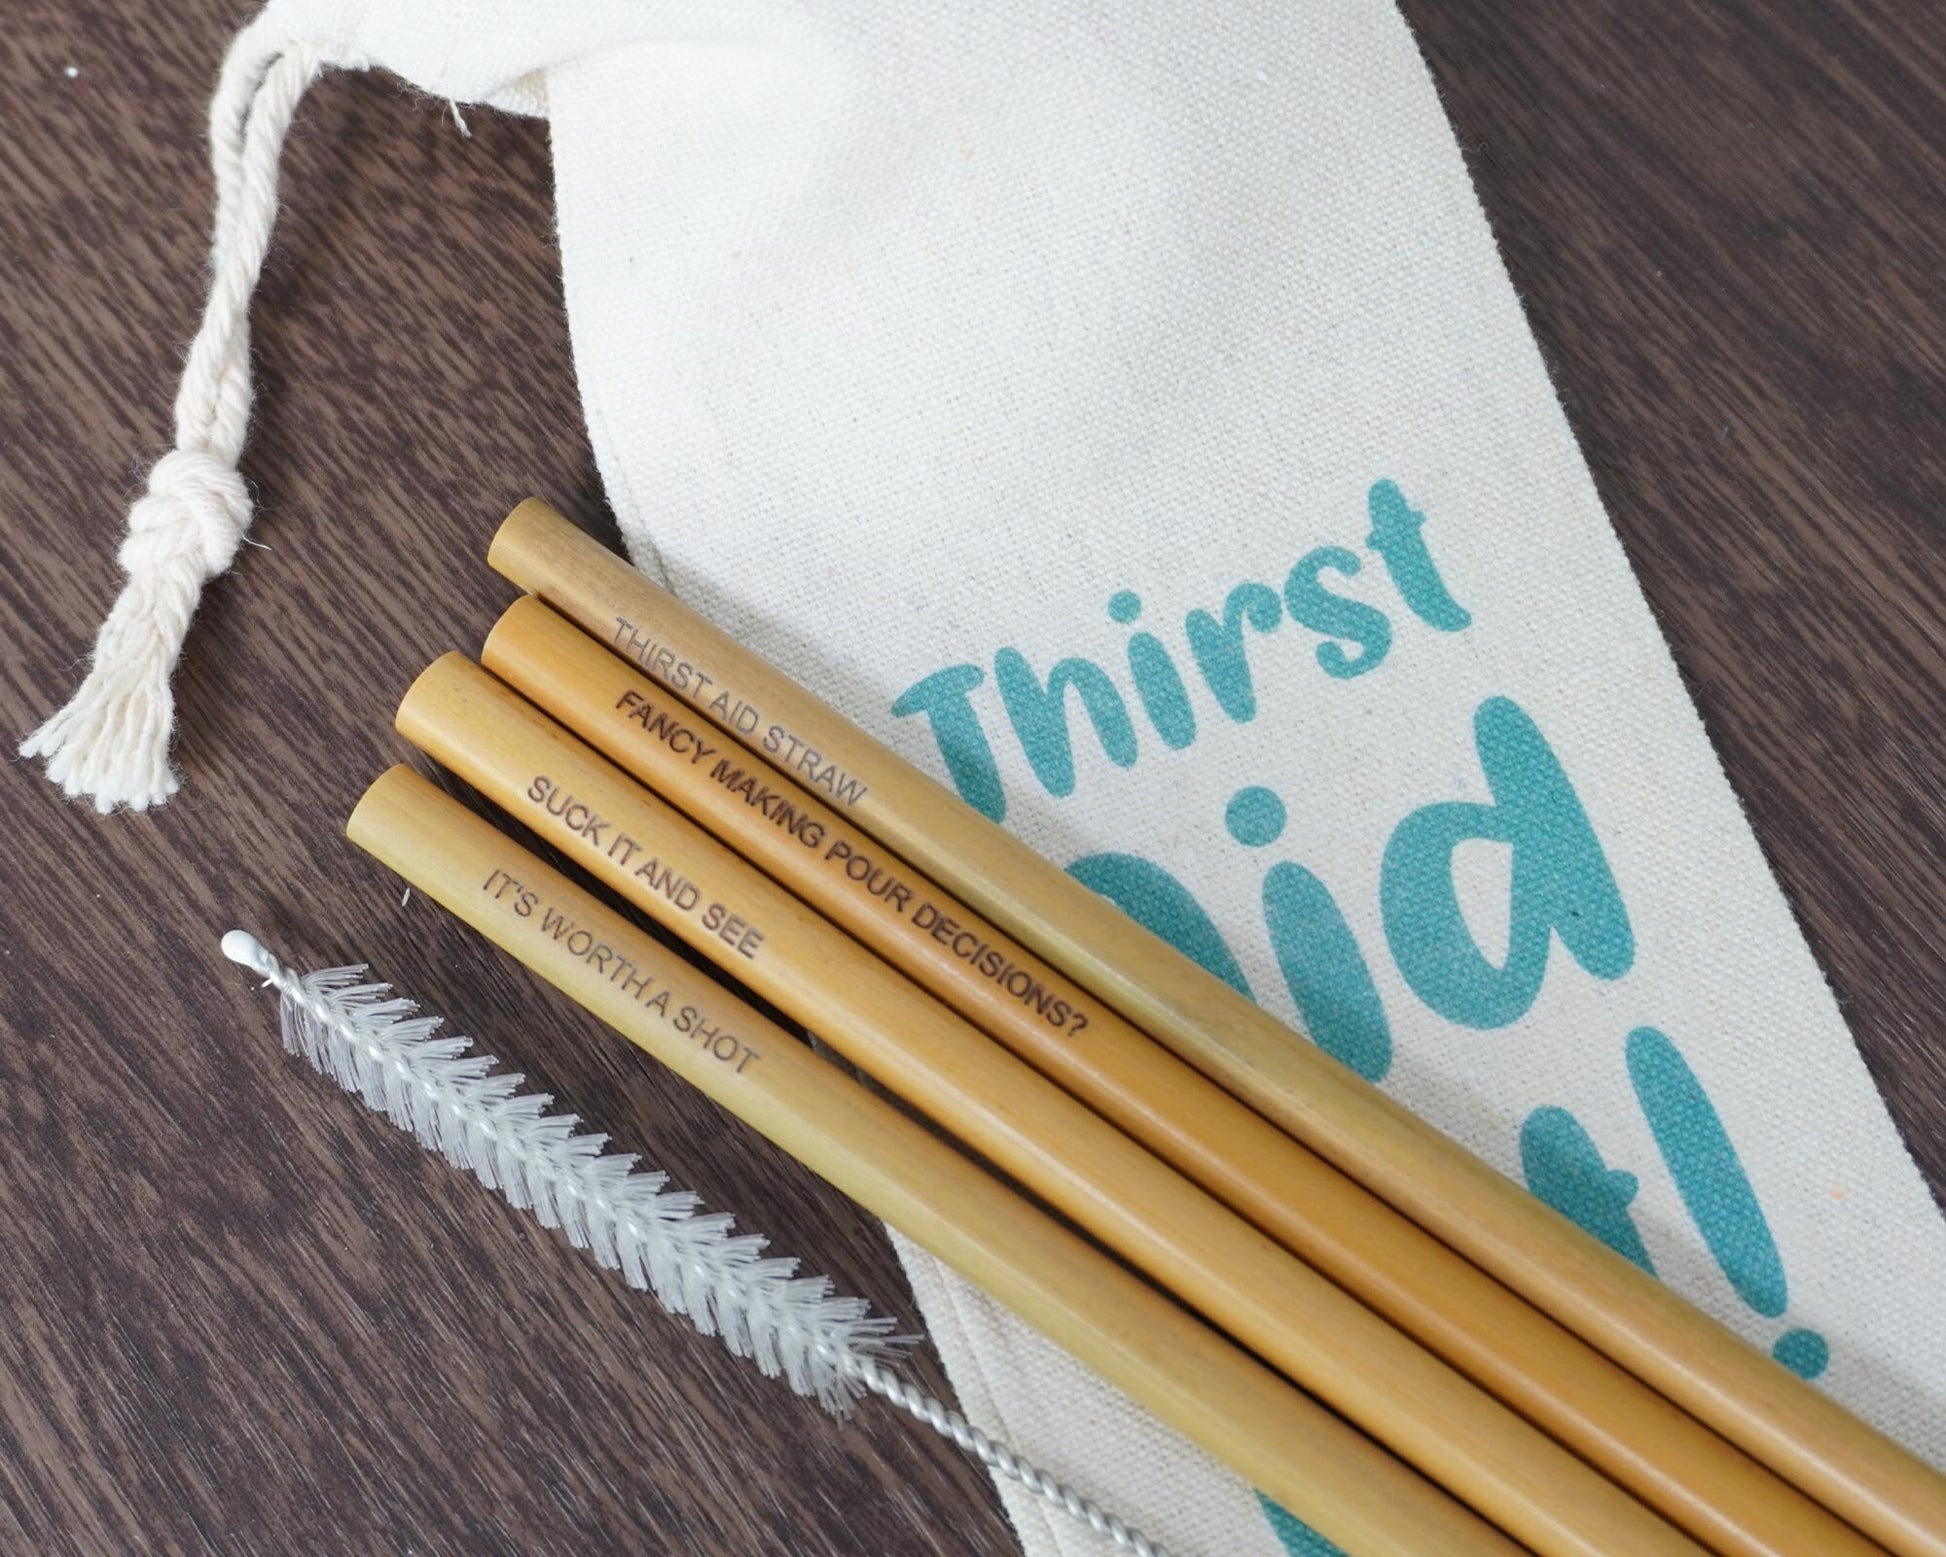 6 in 1 Bamboo Drinking Straw Kit | Adult Engraved Drinking Straw Puns | Travel Pouch Case and Cleaning Brush Included Morning Cuppa Gifts